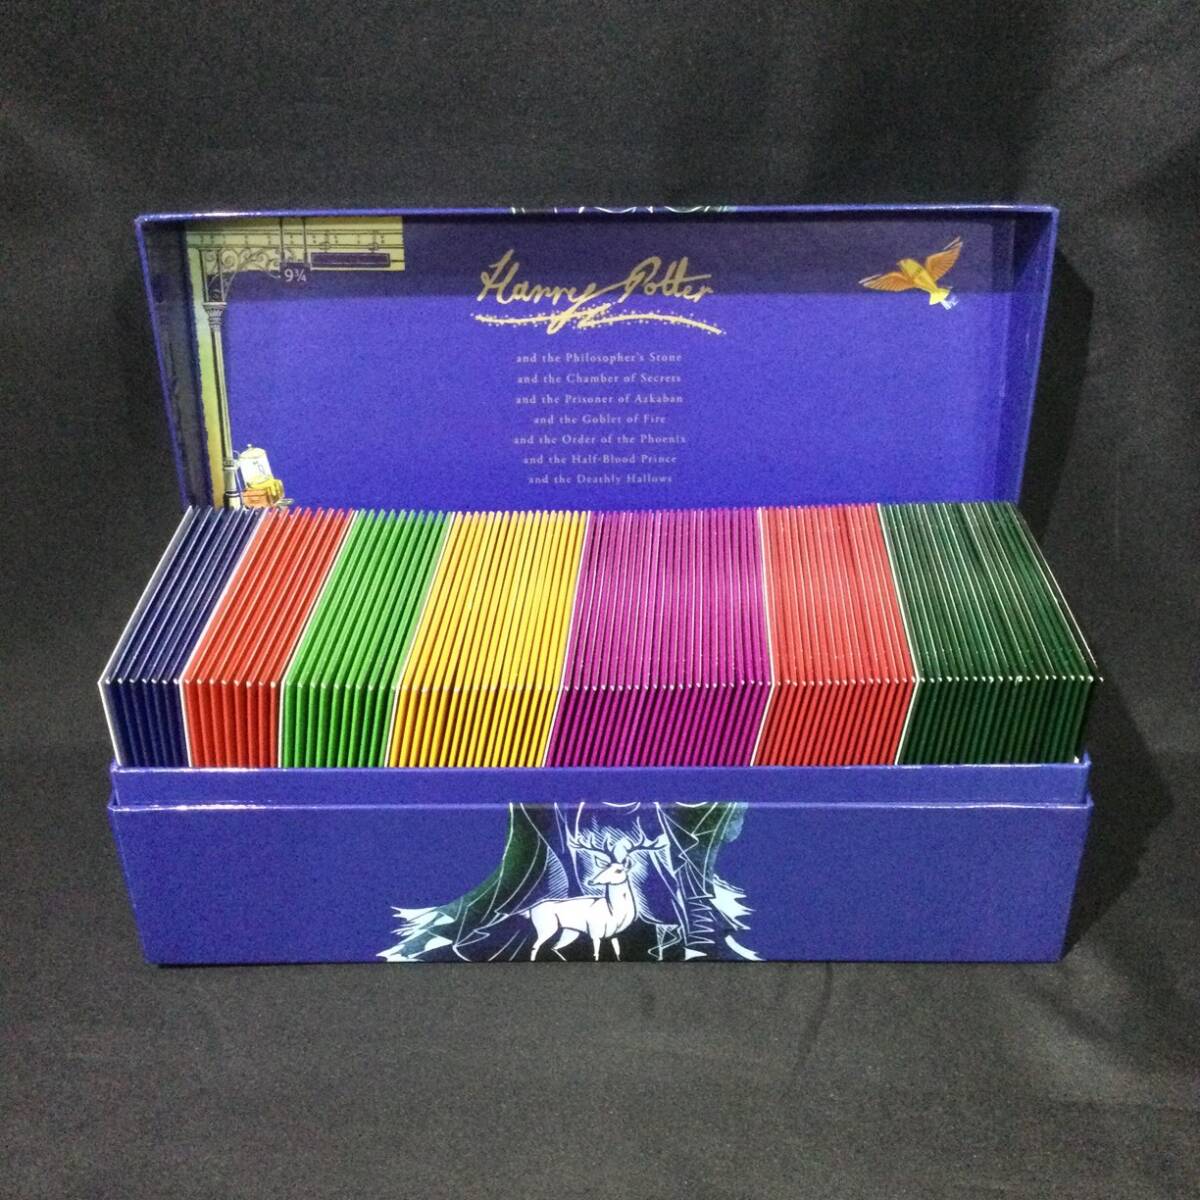 A769[ foreign record ]*[Harry Potter Audio Boxed Set The Complete Story] Harry Potter complete set of works reading aloud CD 103 sheets *by J.k.ROWLING STEPHEN FRY*